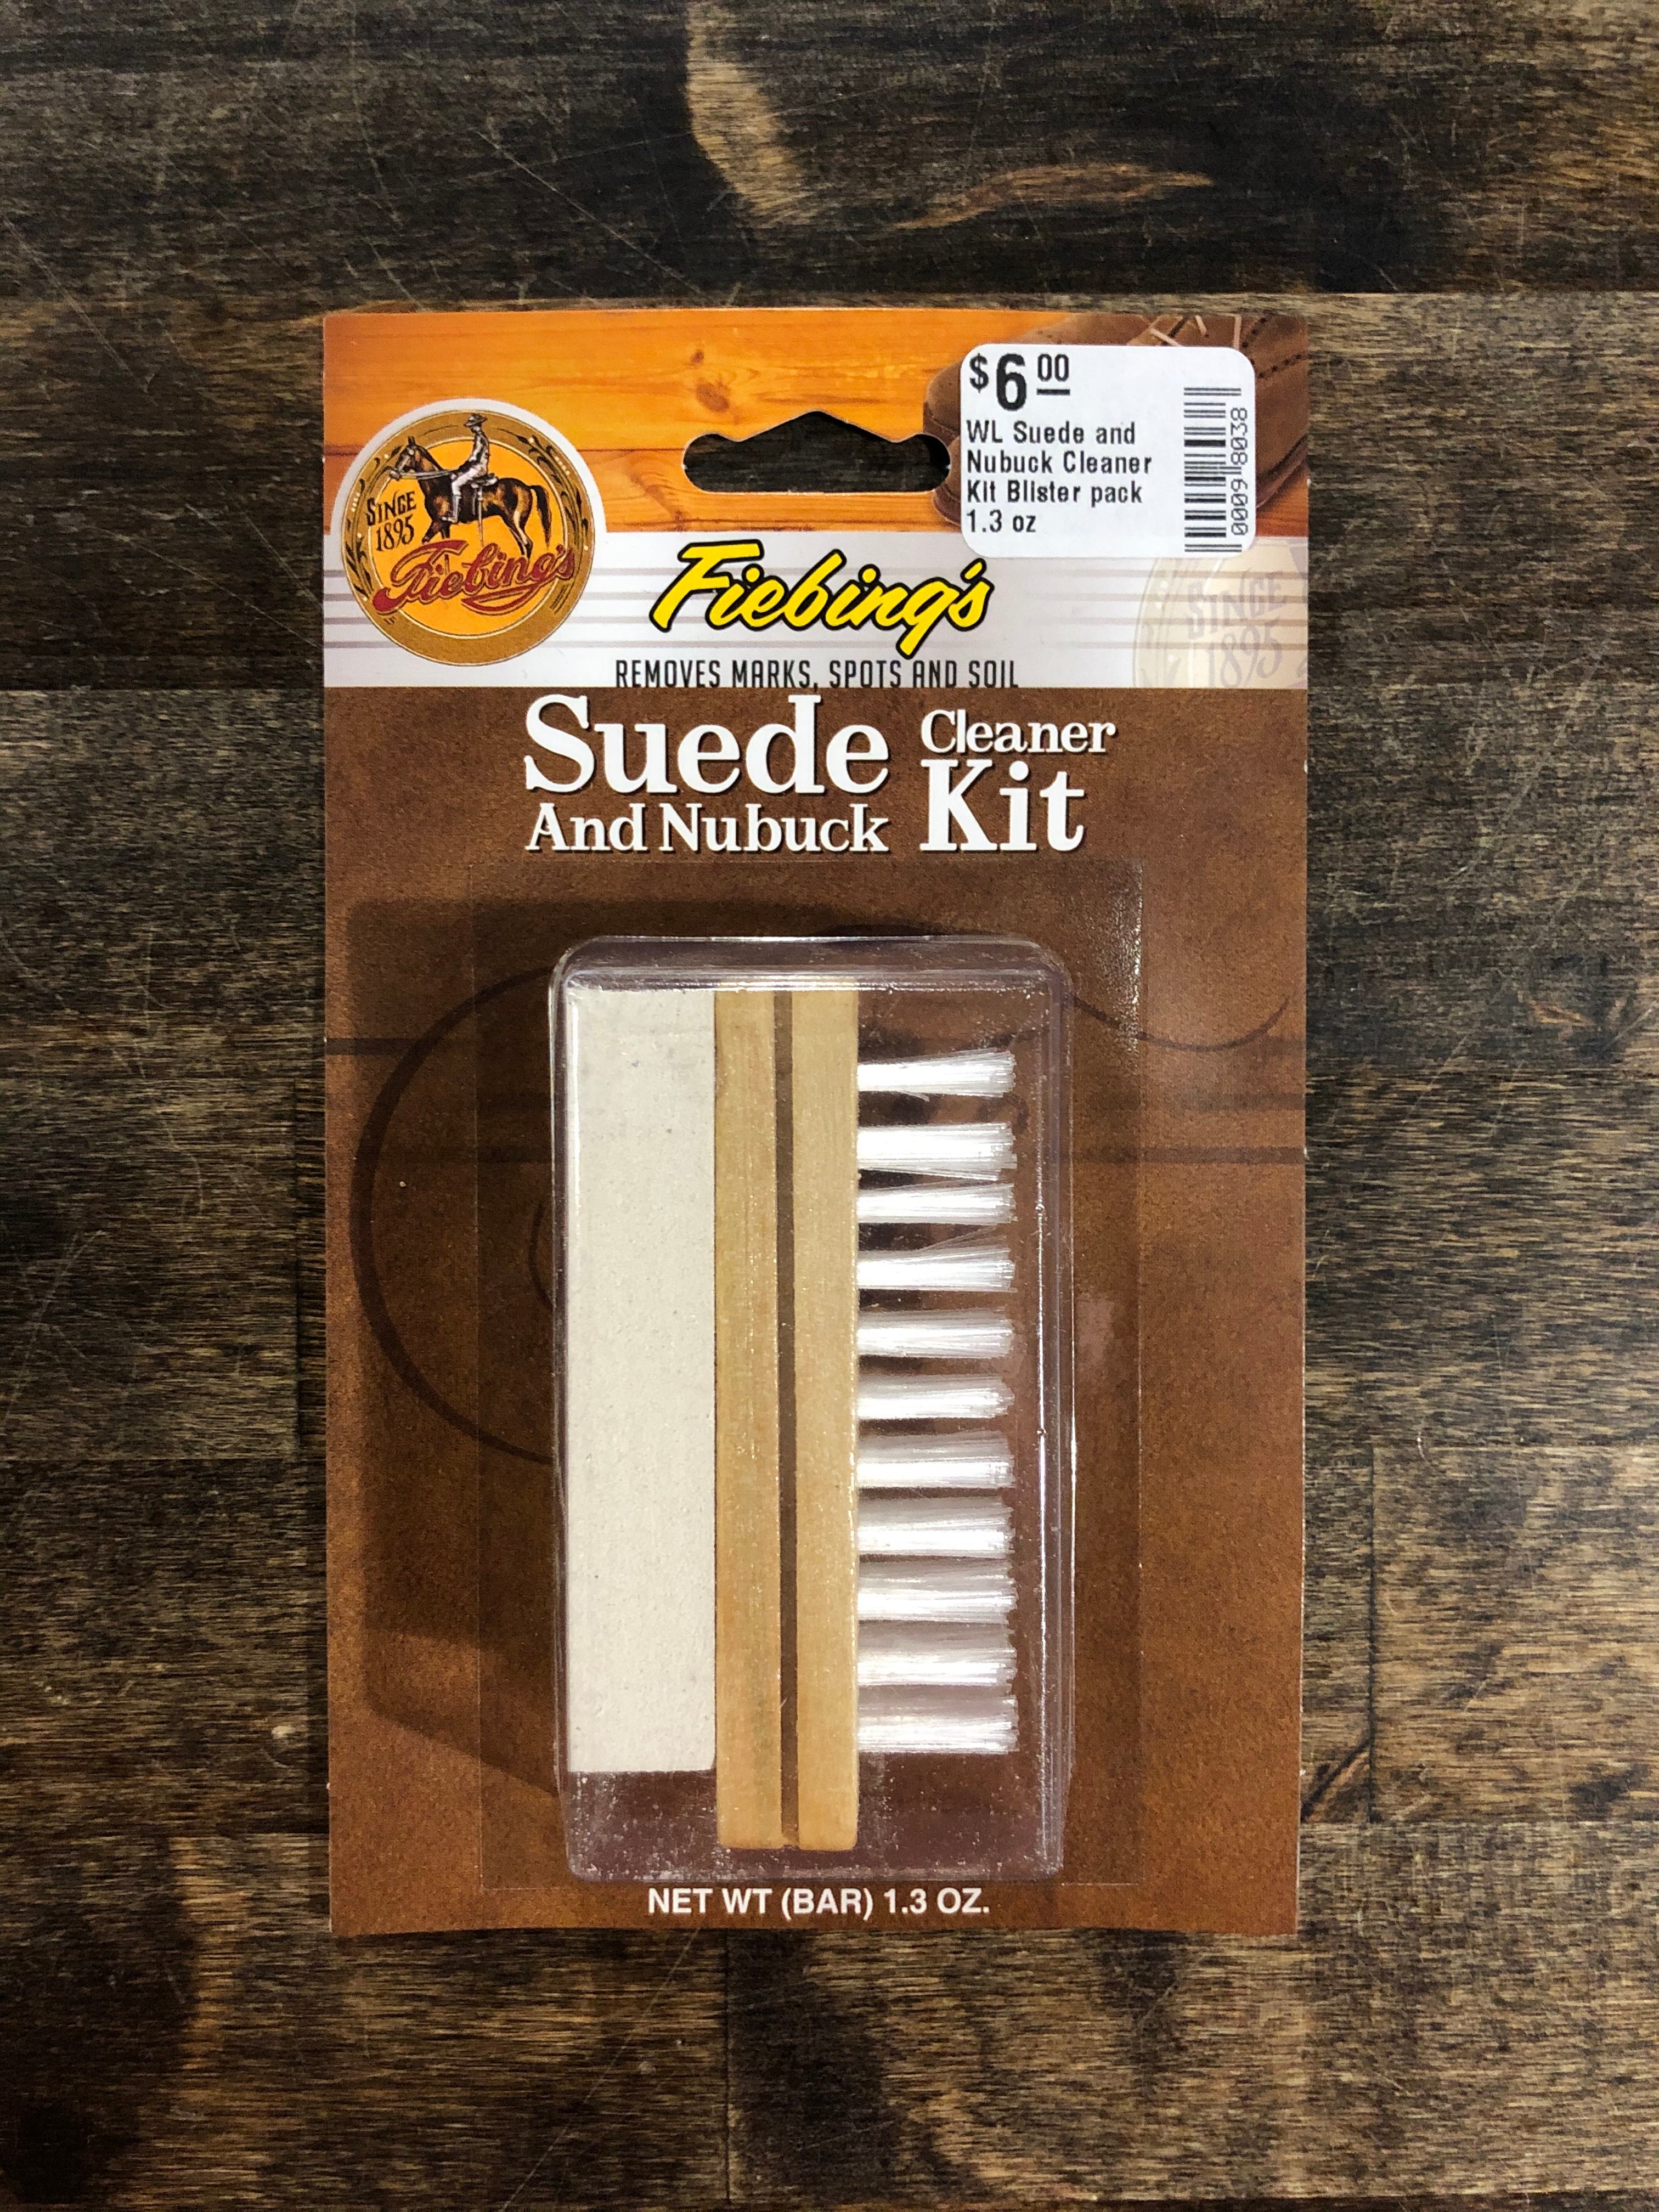 Lucchese Leather Care Kit